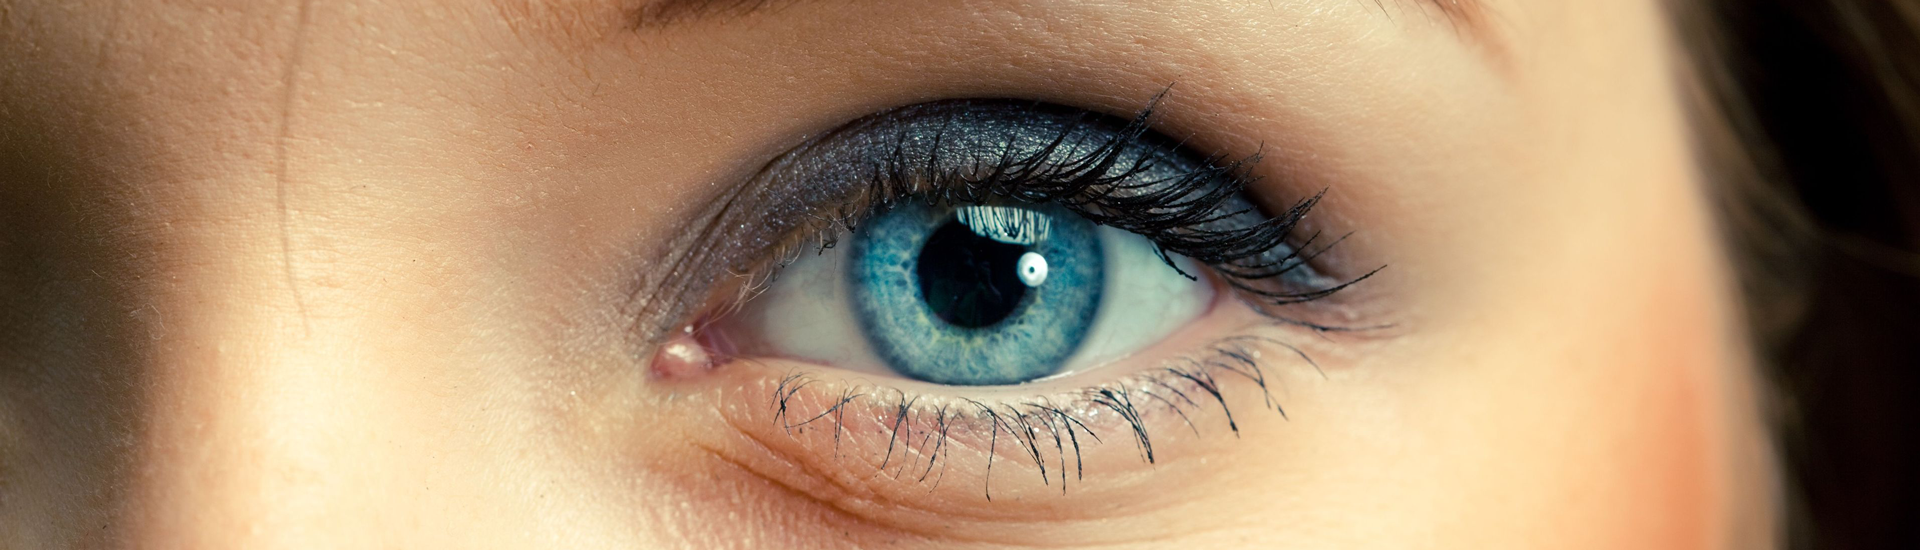 What are the most common eye injuries?